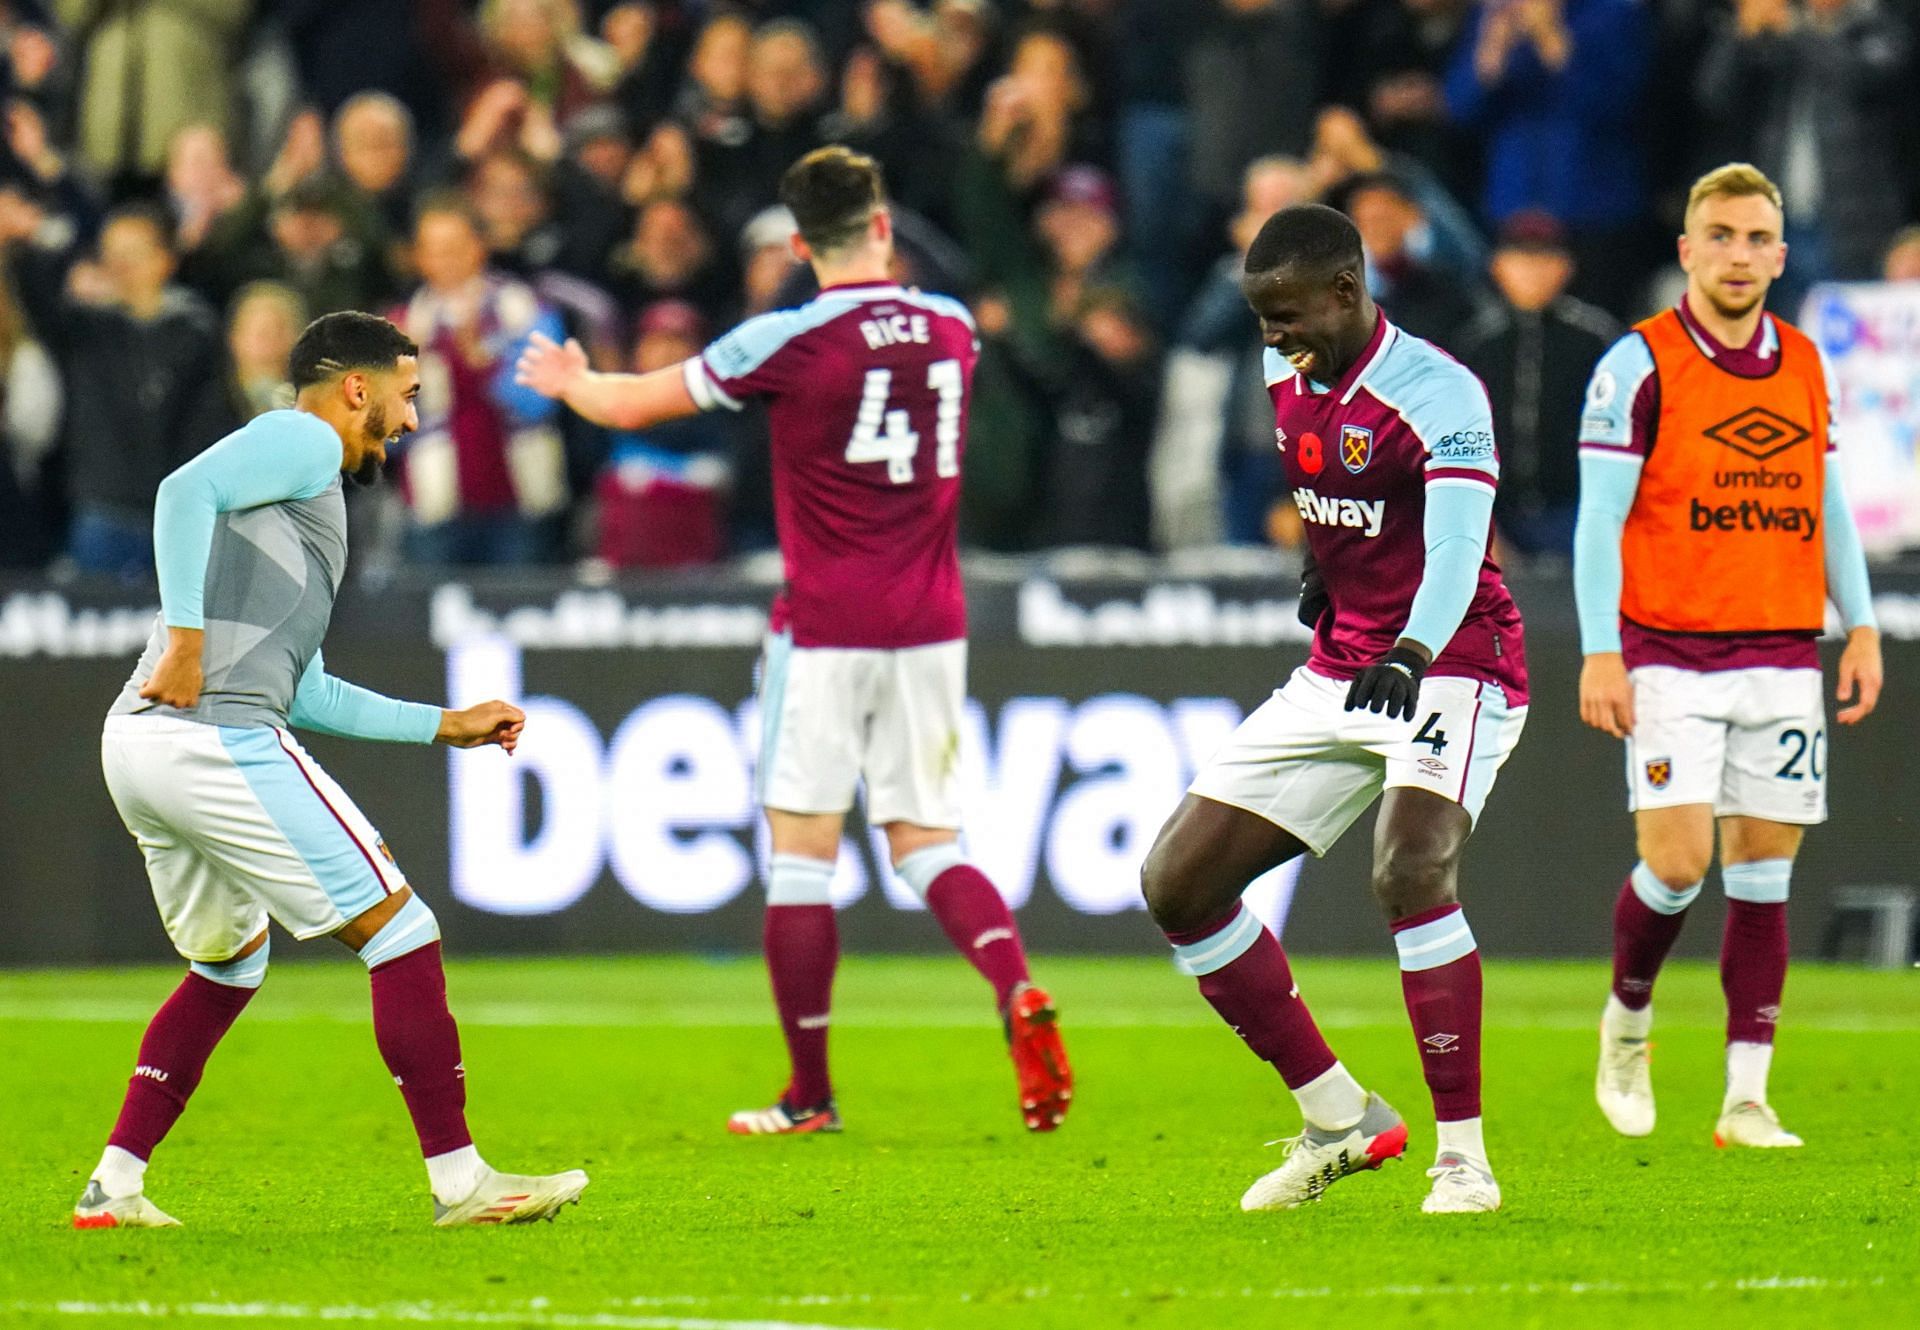 West Ham defeated Liverpool to end their unbeaten run